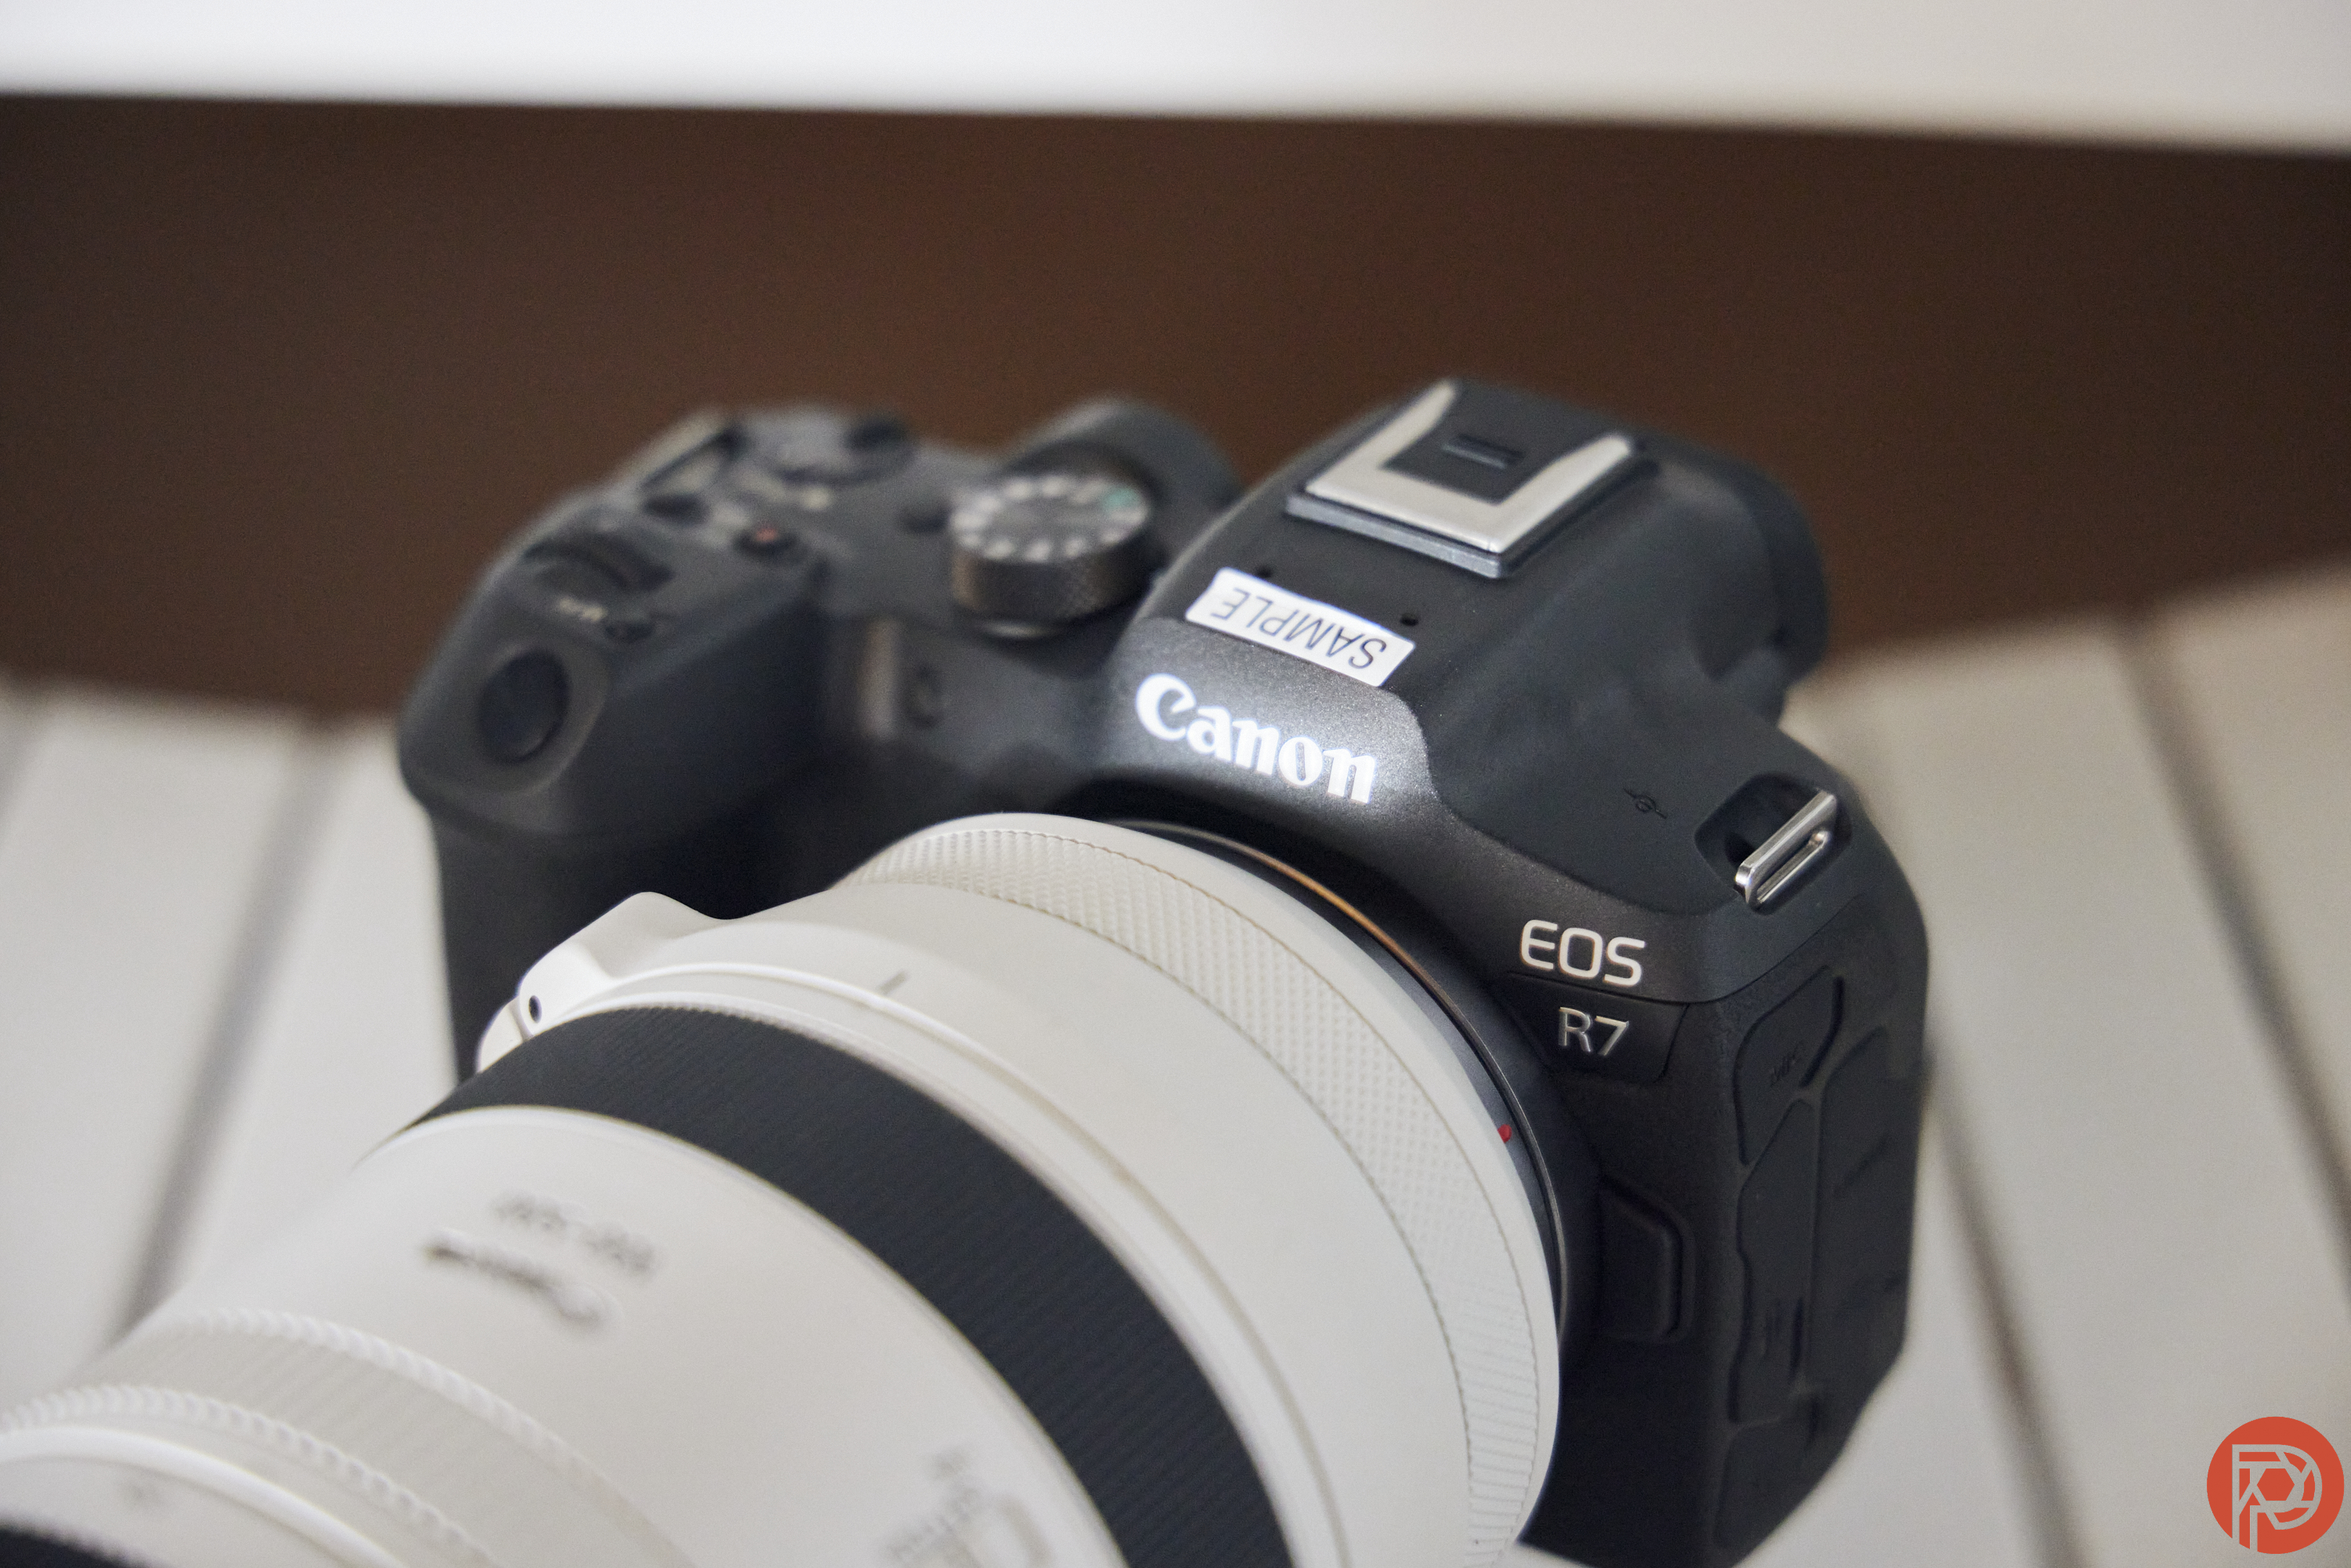 Canon EOS R7 Evaluation. Some of the Absolute best Cameras This Yr - The Online Money Channel